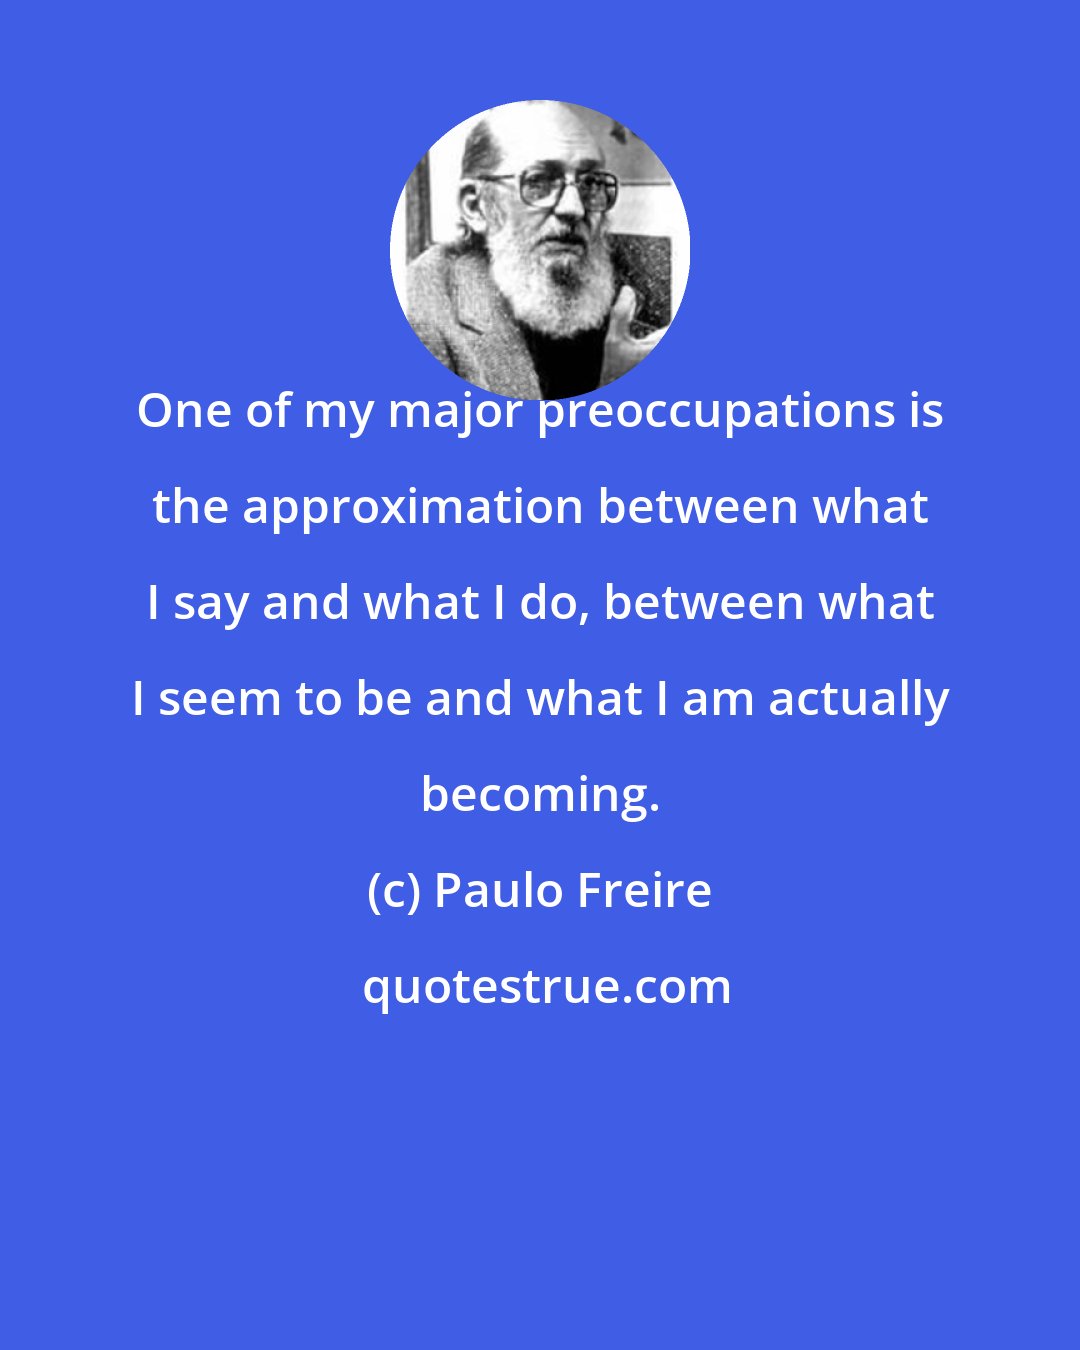 Paulo Freire: One of my major preoccupations is the approximation between what I say and what I do, between what I seem to be and what I am actually becoming.